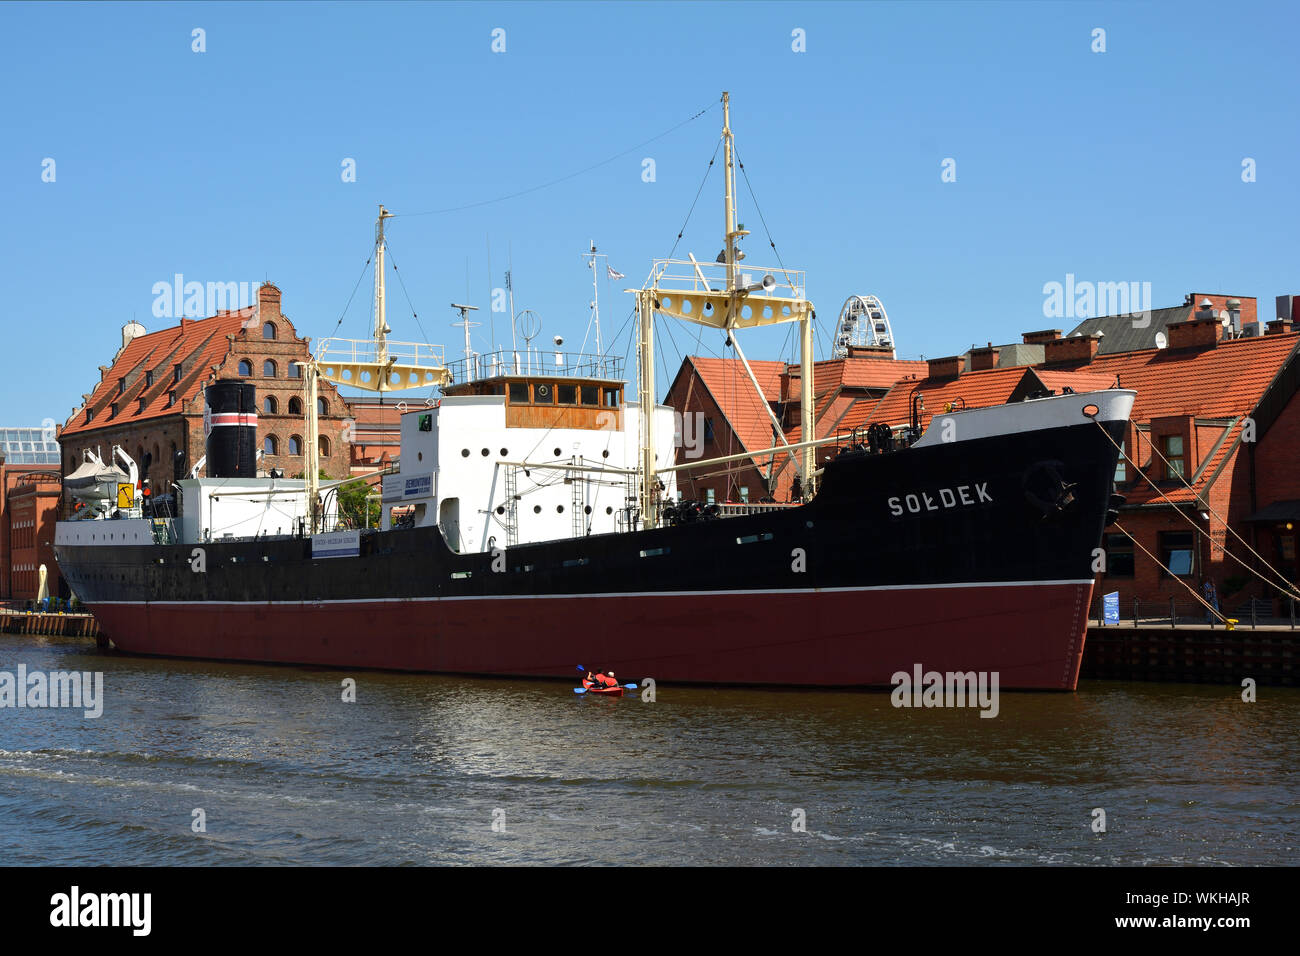 Museum ship Soldek in the National Maritime Museum on the river Motlawa in Gdansk - Poland. Stock Photo